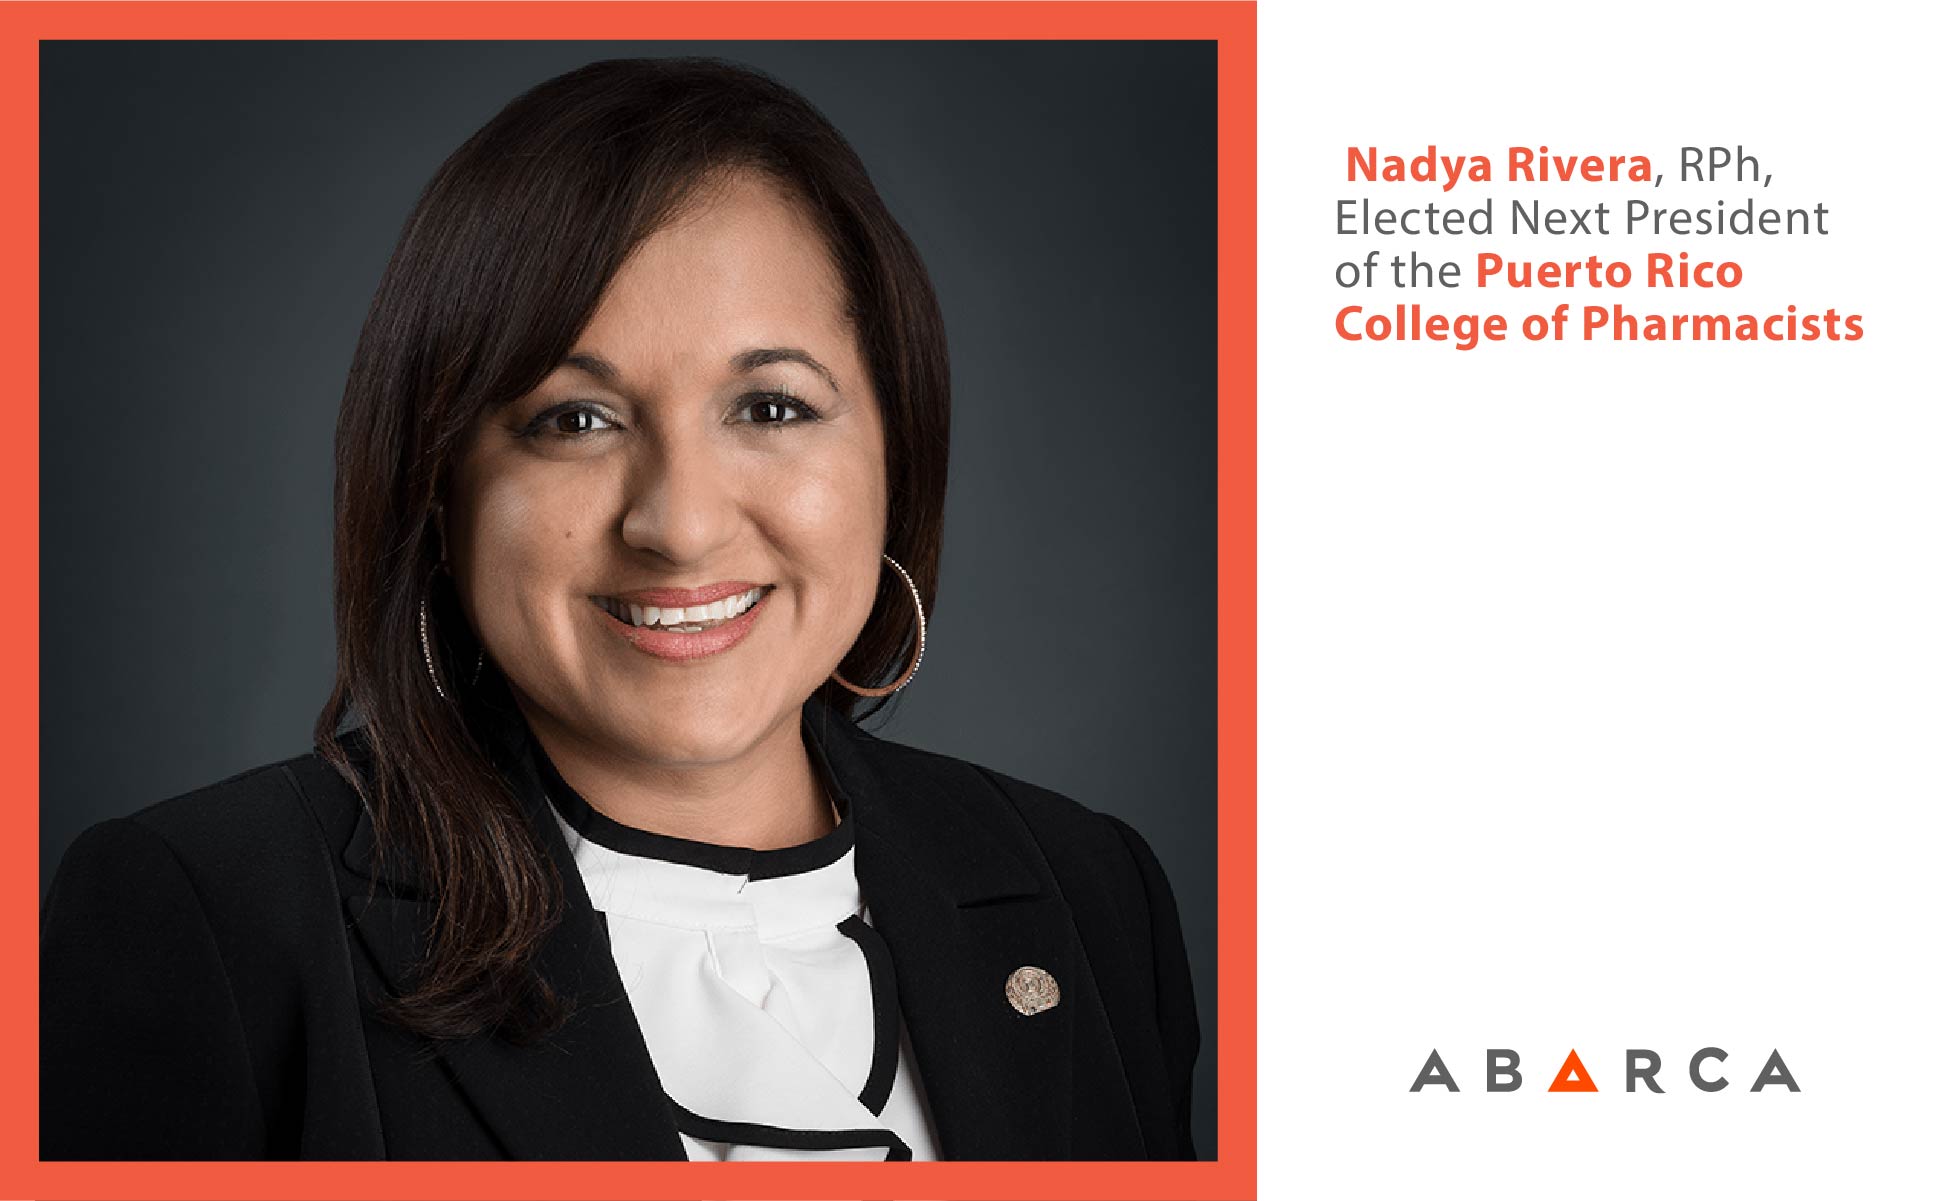 Abarca Health: Nayda Rivera, RPh, elected next president of the Puerto Rico College of Pharmacists